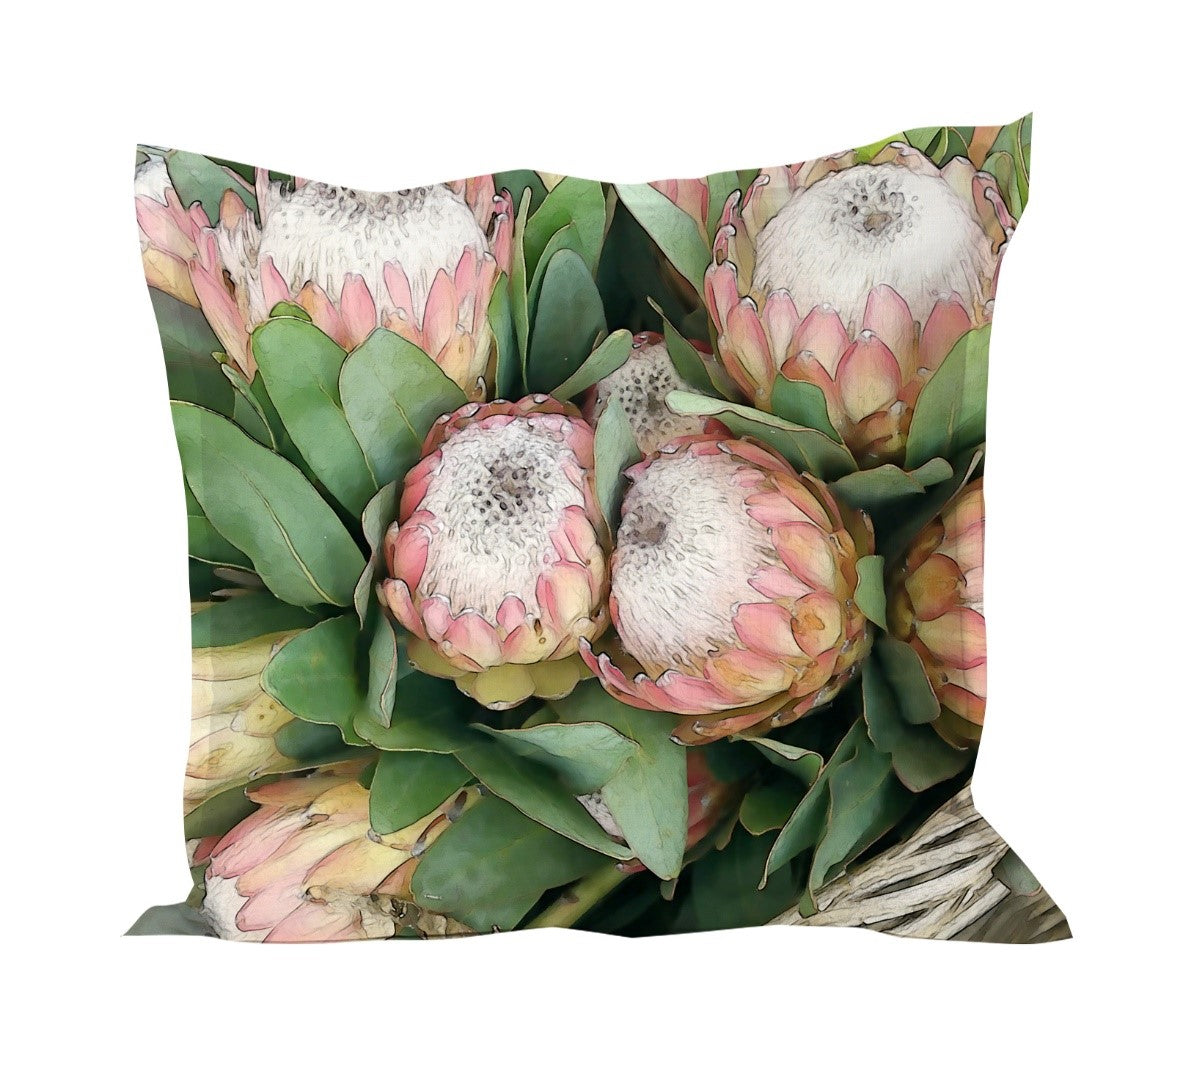 Cushion cover in Protea in Basket